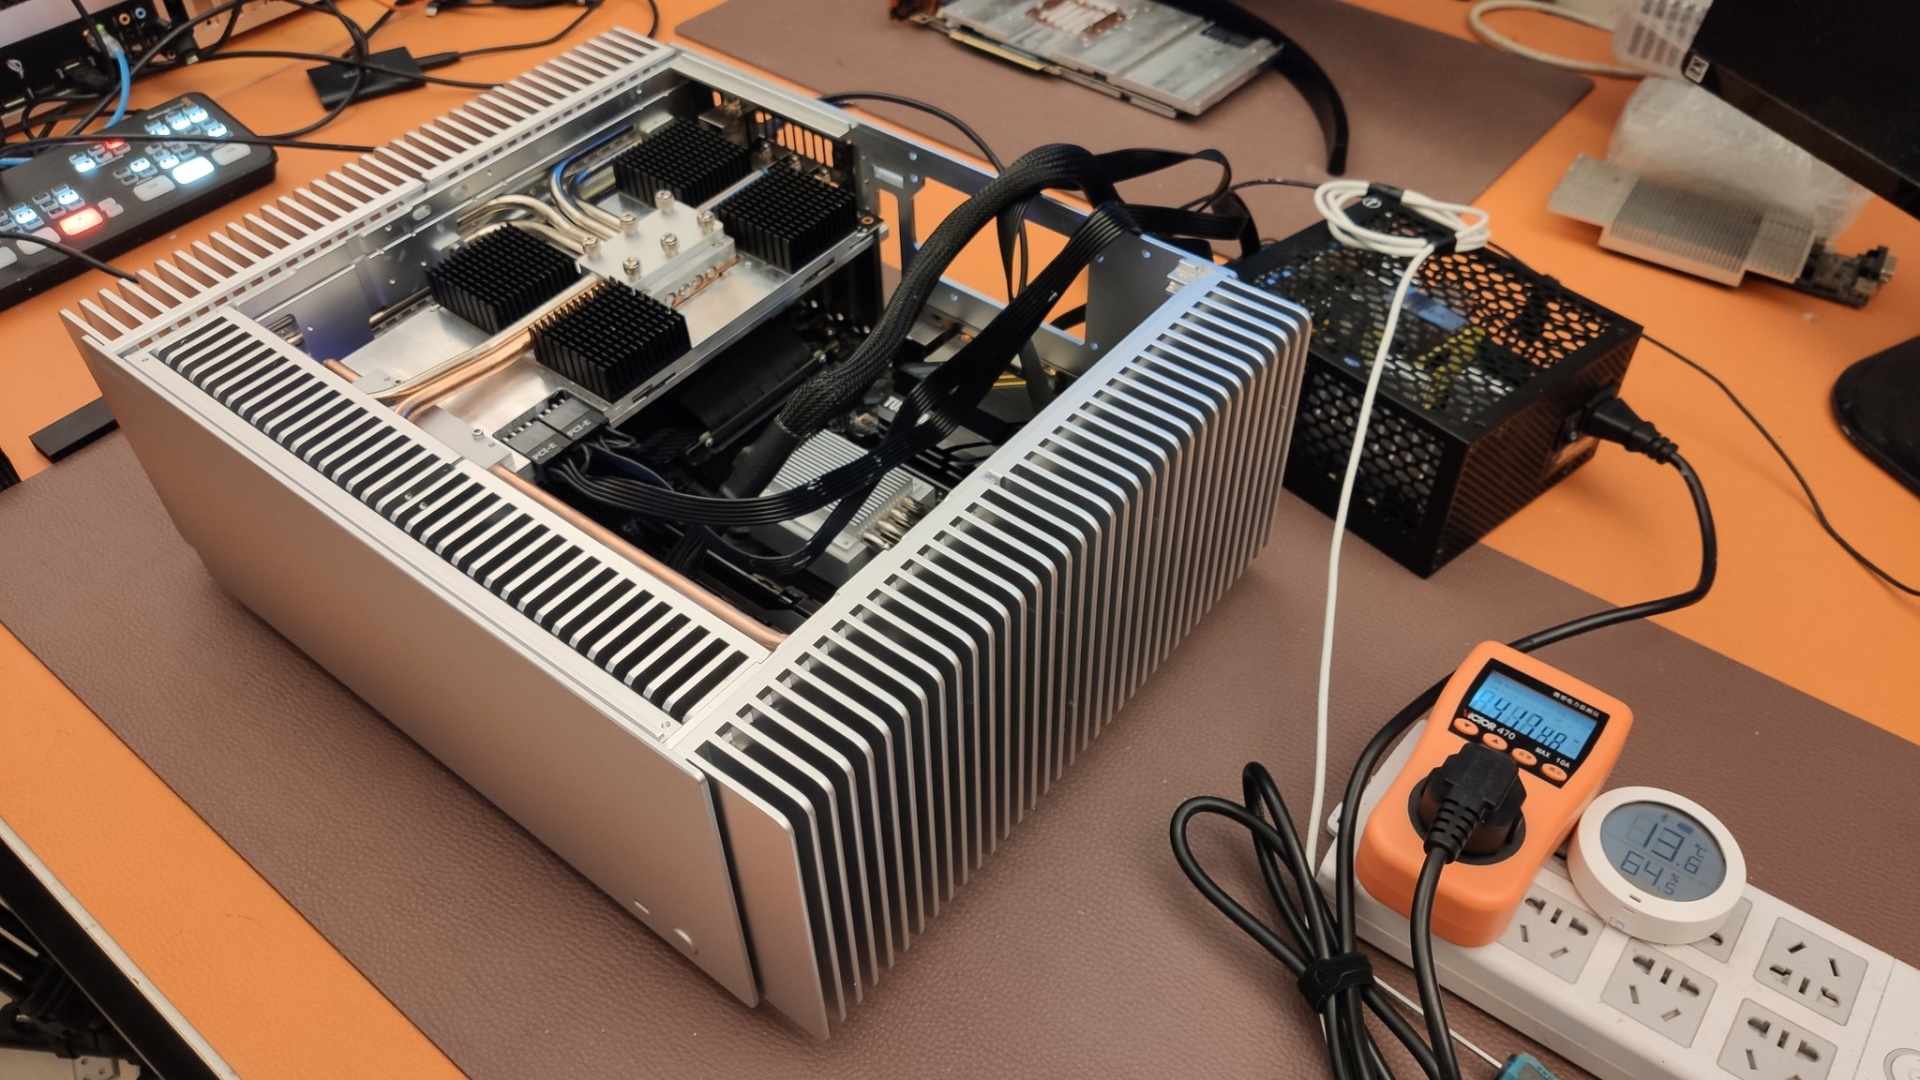  This passively cooled RTX 3080 survives notorious benchmark for 4 minutes 27 seconds 